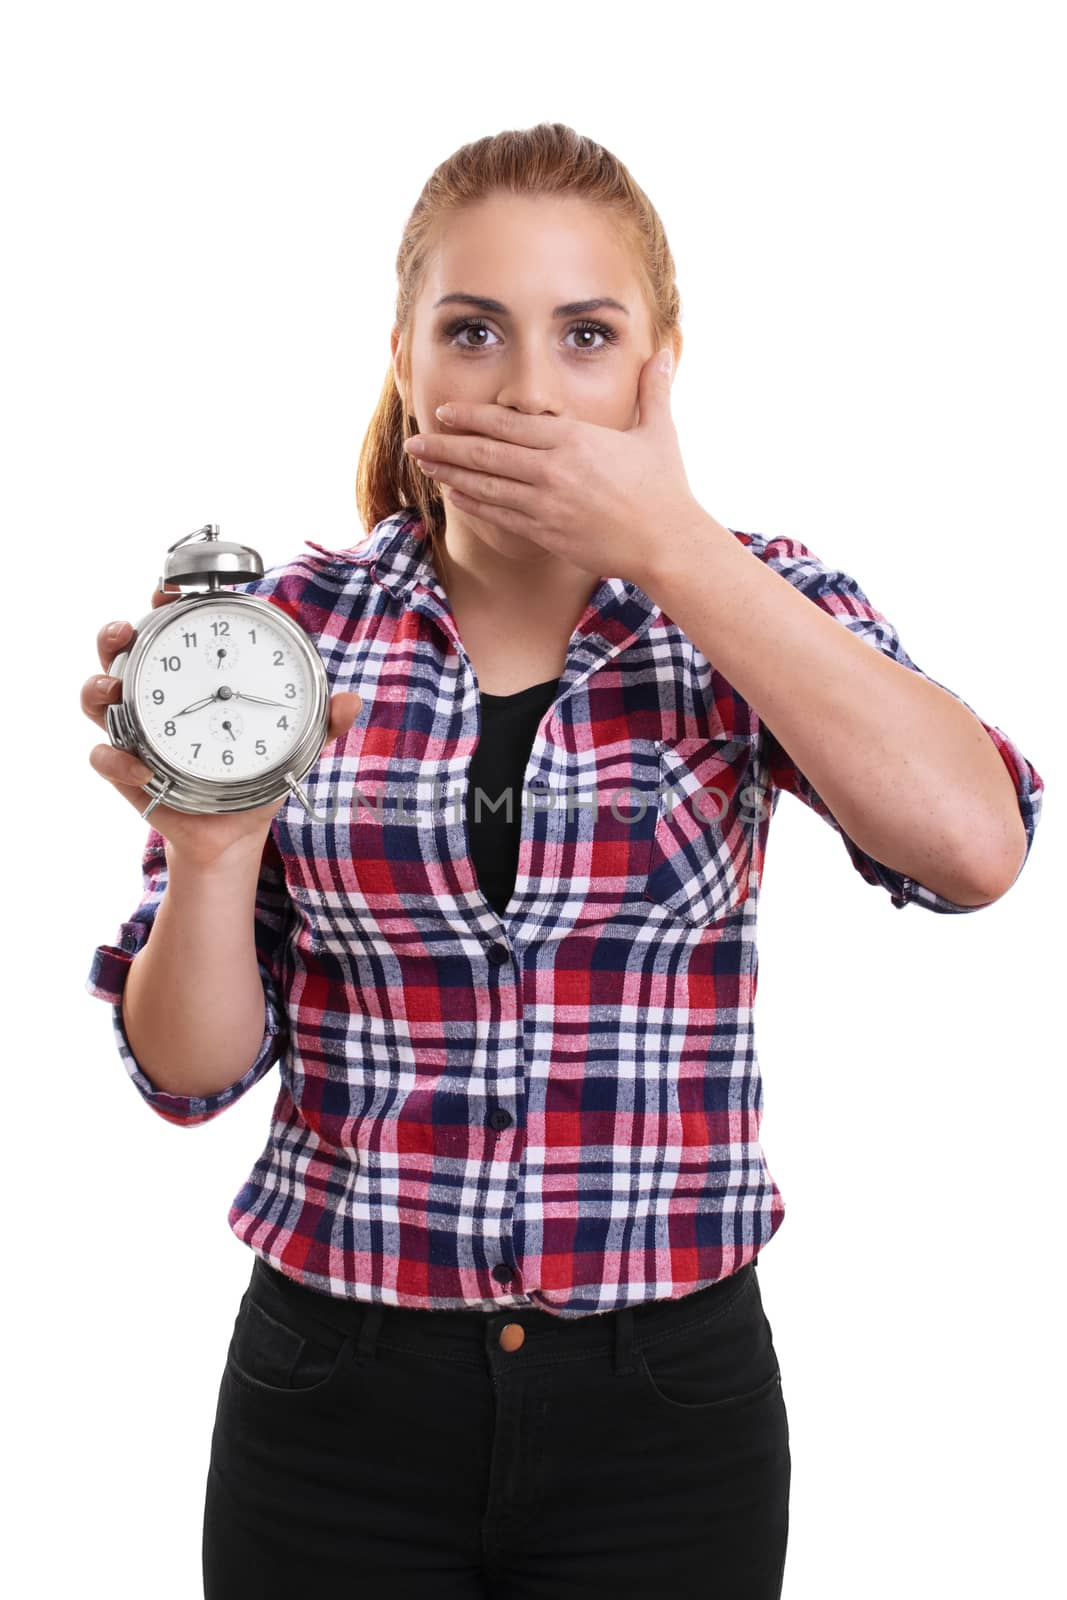 Portrait of a young beautiful woman dressed in plaid shirt holding an old school alarm clock, shocked and surprised to see what's the time. Isolated on a white background.